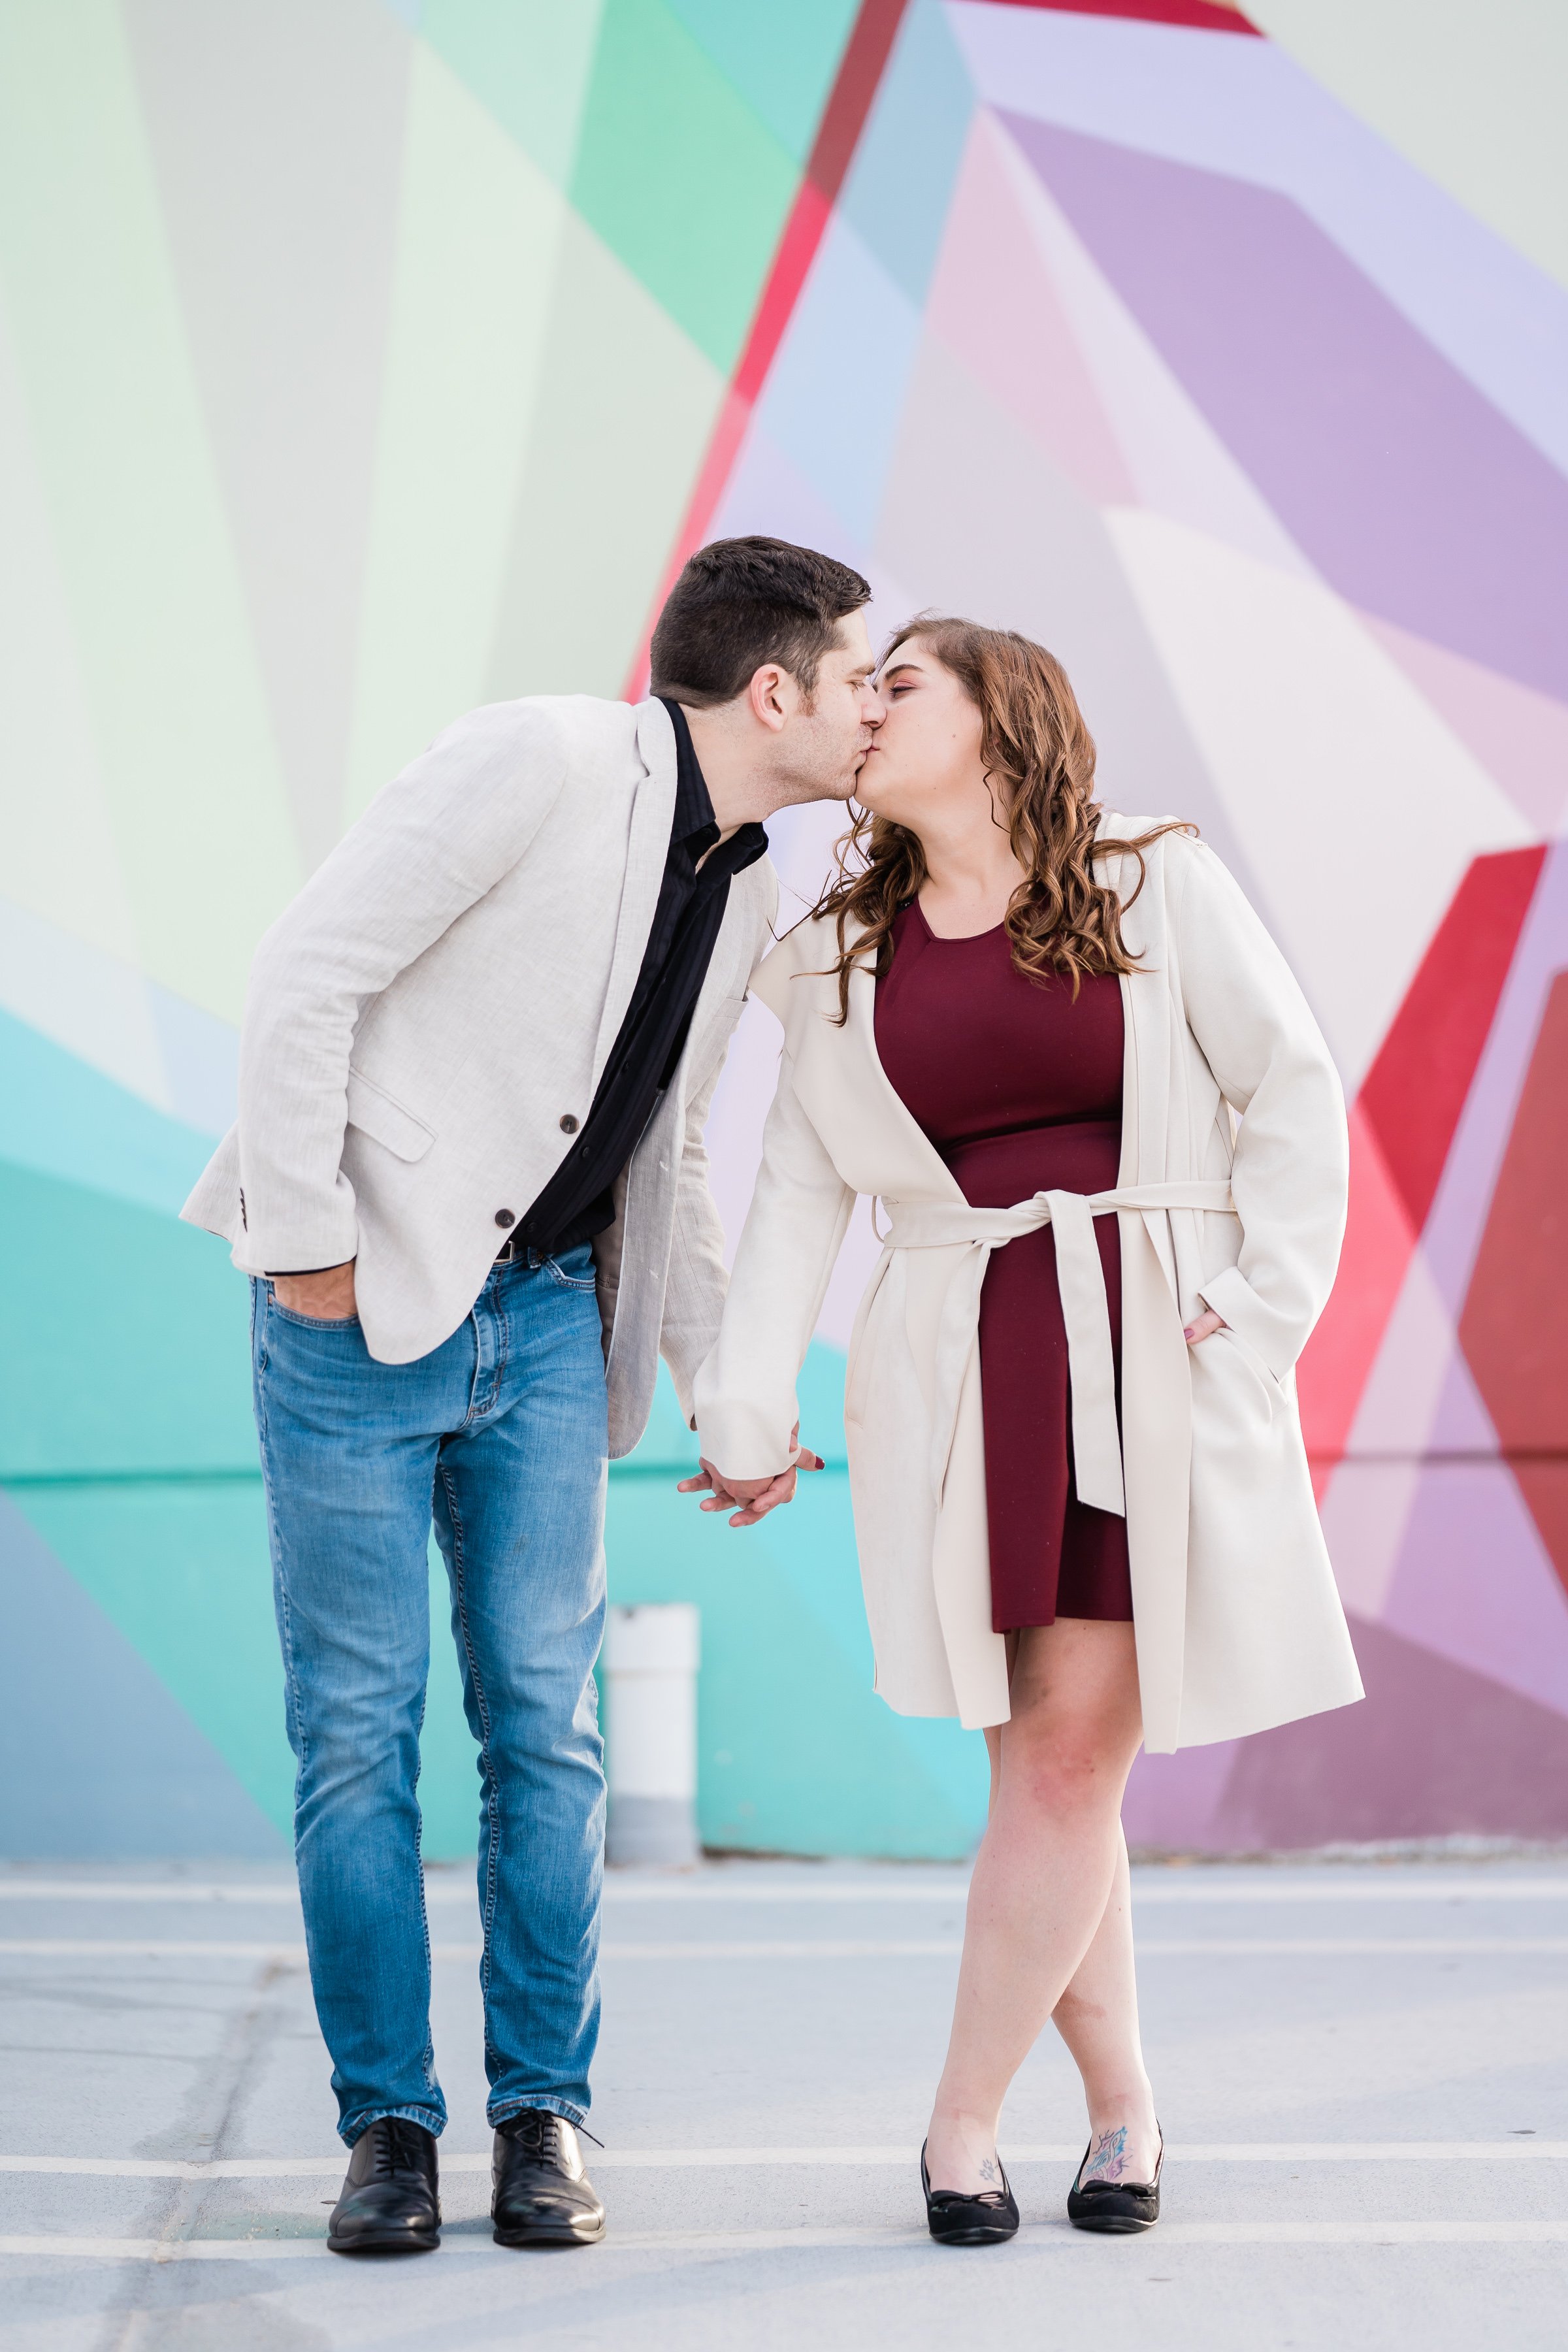 Fort Wayne wedding photographers capture engaged couple in front of an art mural downtown